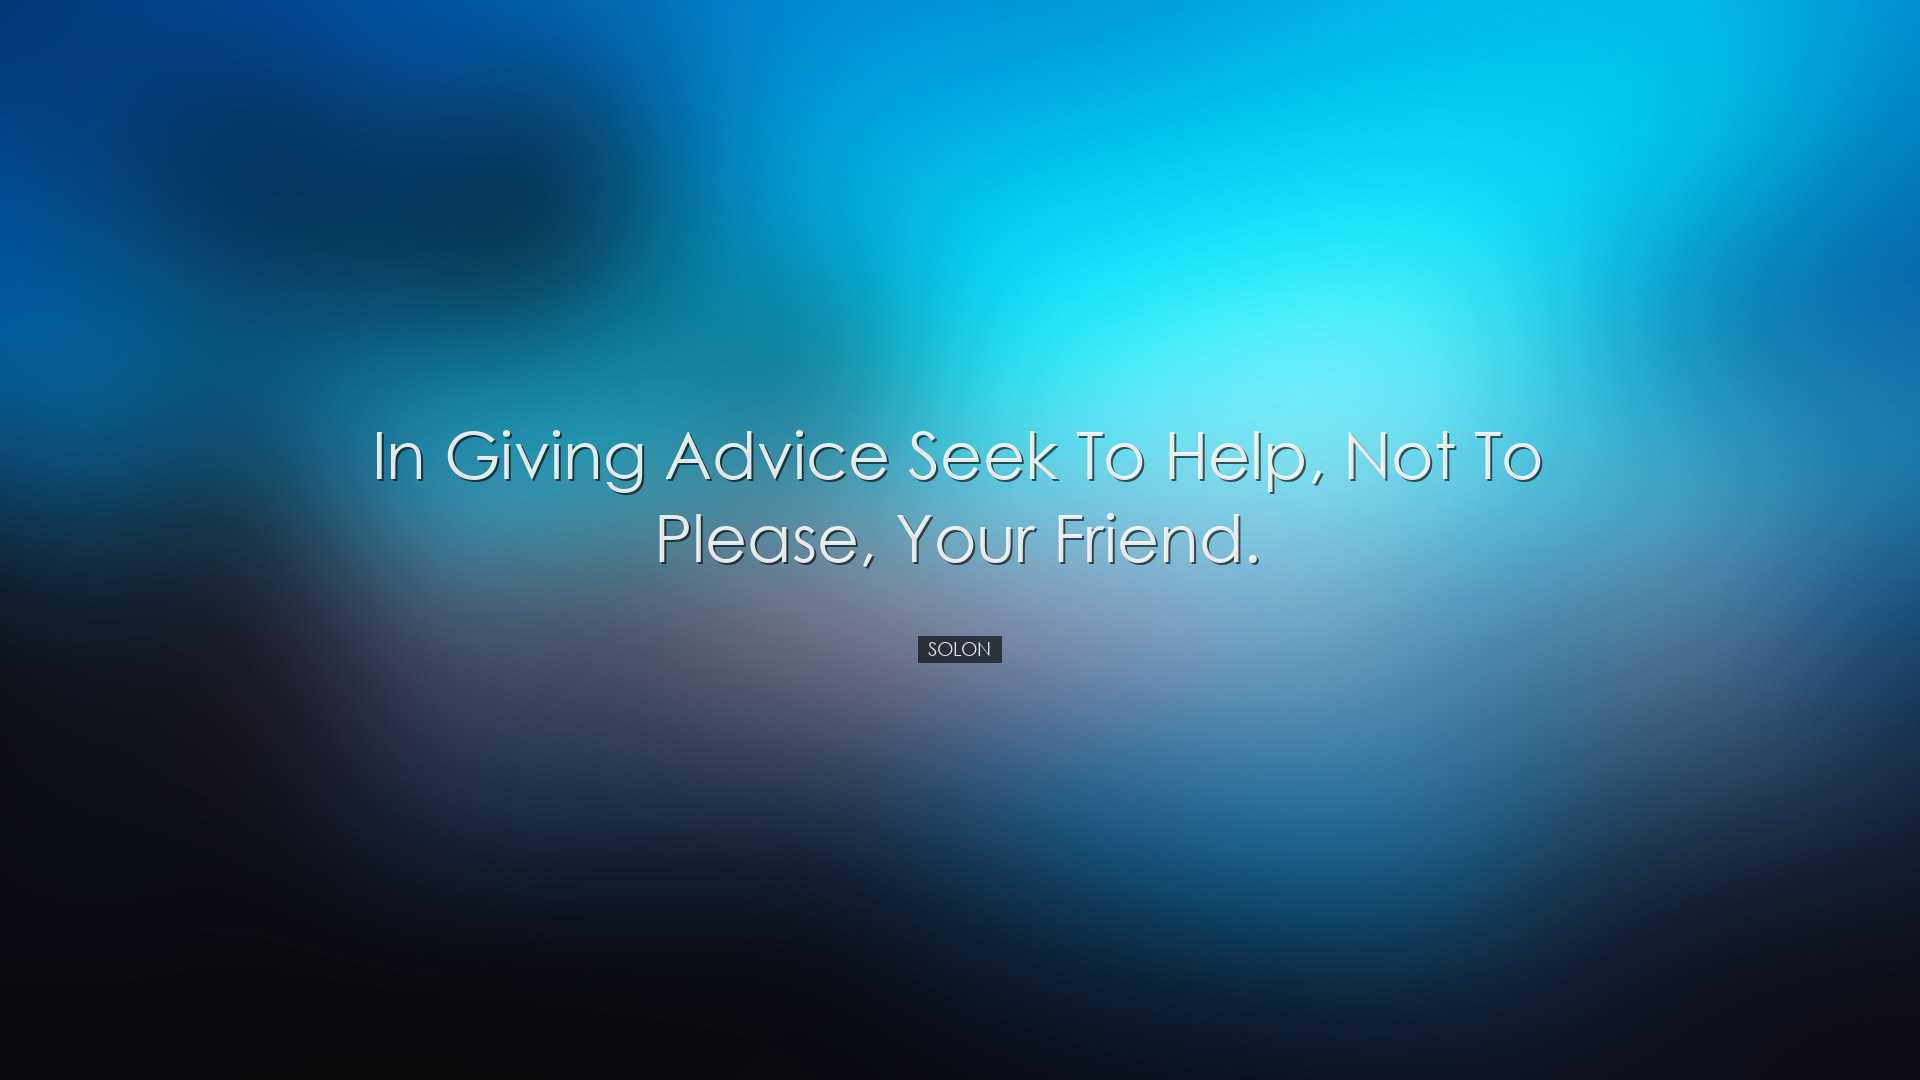 In giving advice seek to help, not to please, your friend. - Solon